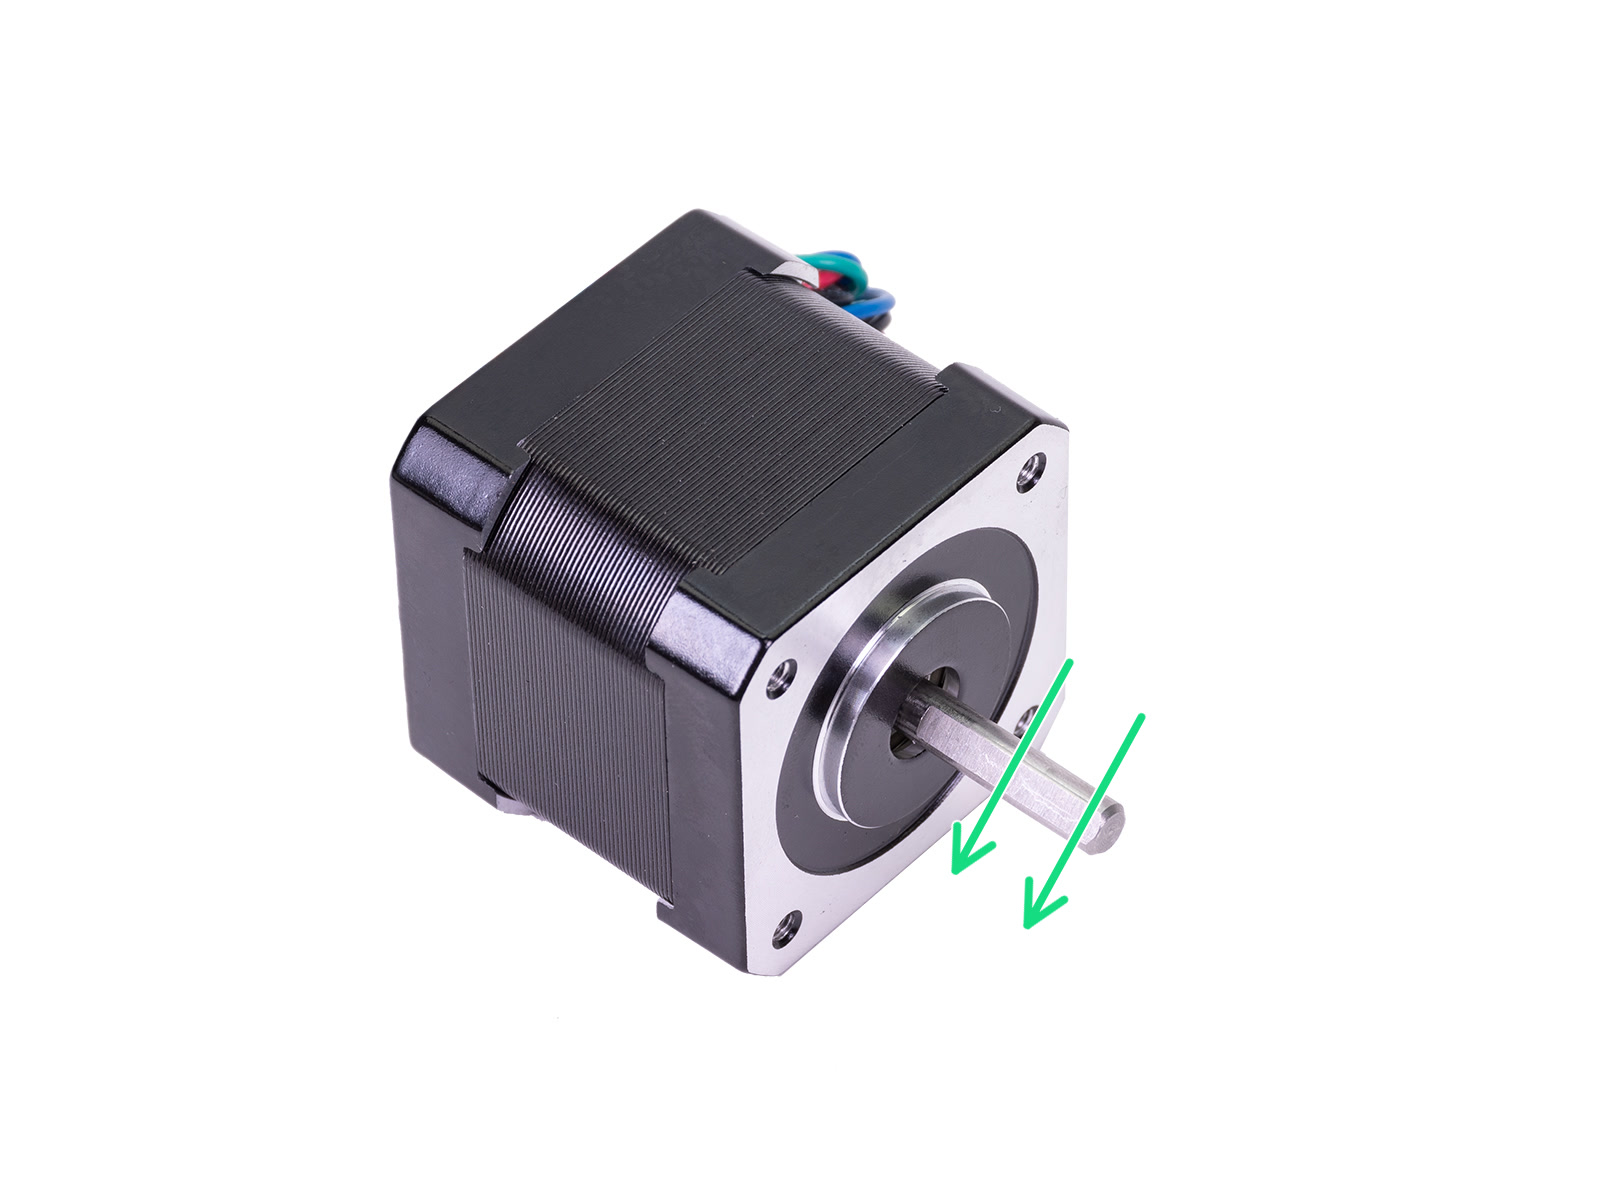 Y-axis motor assembly